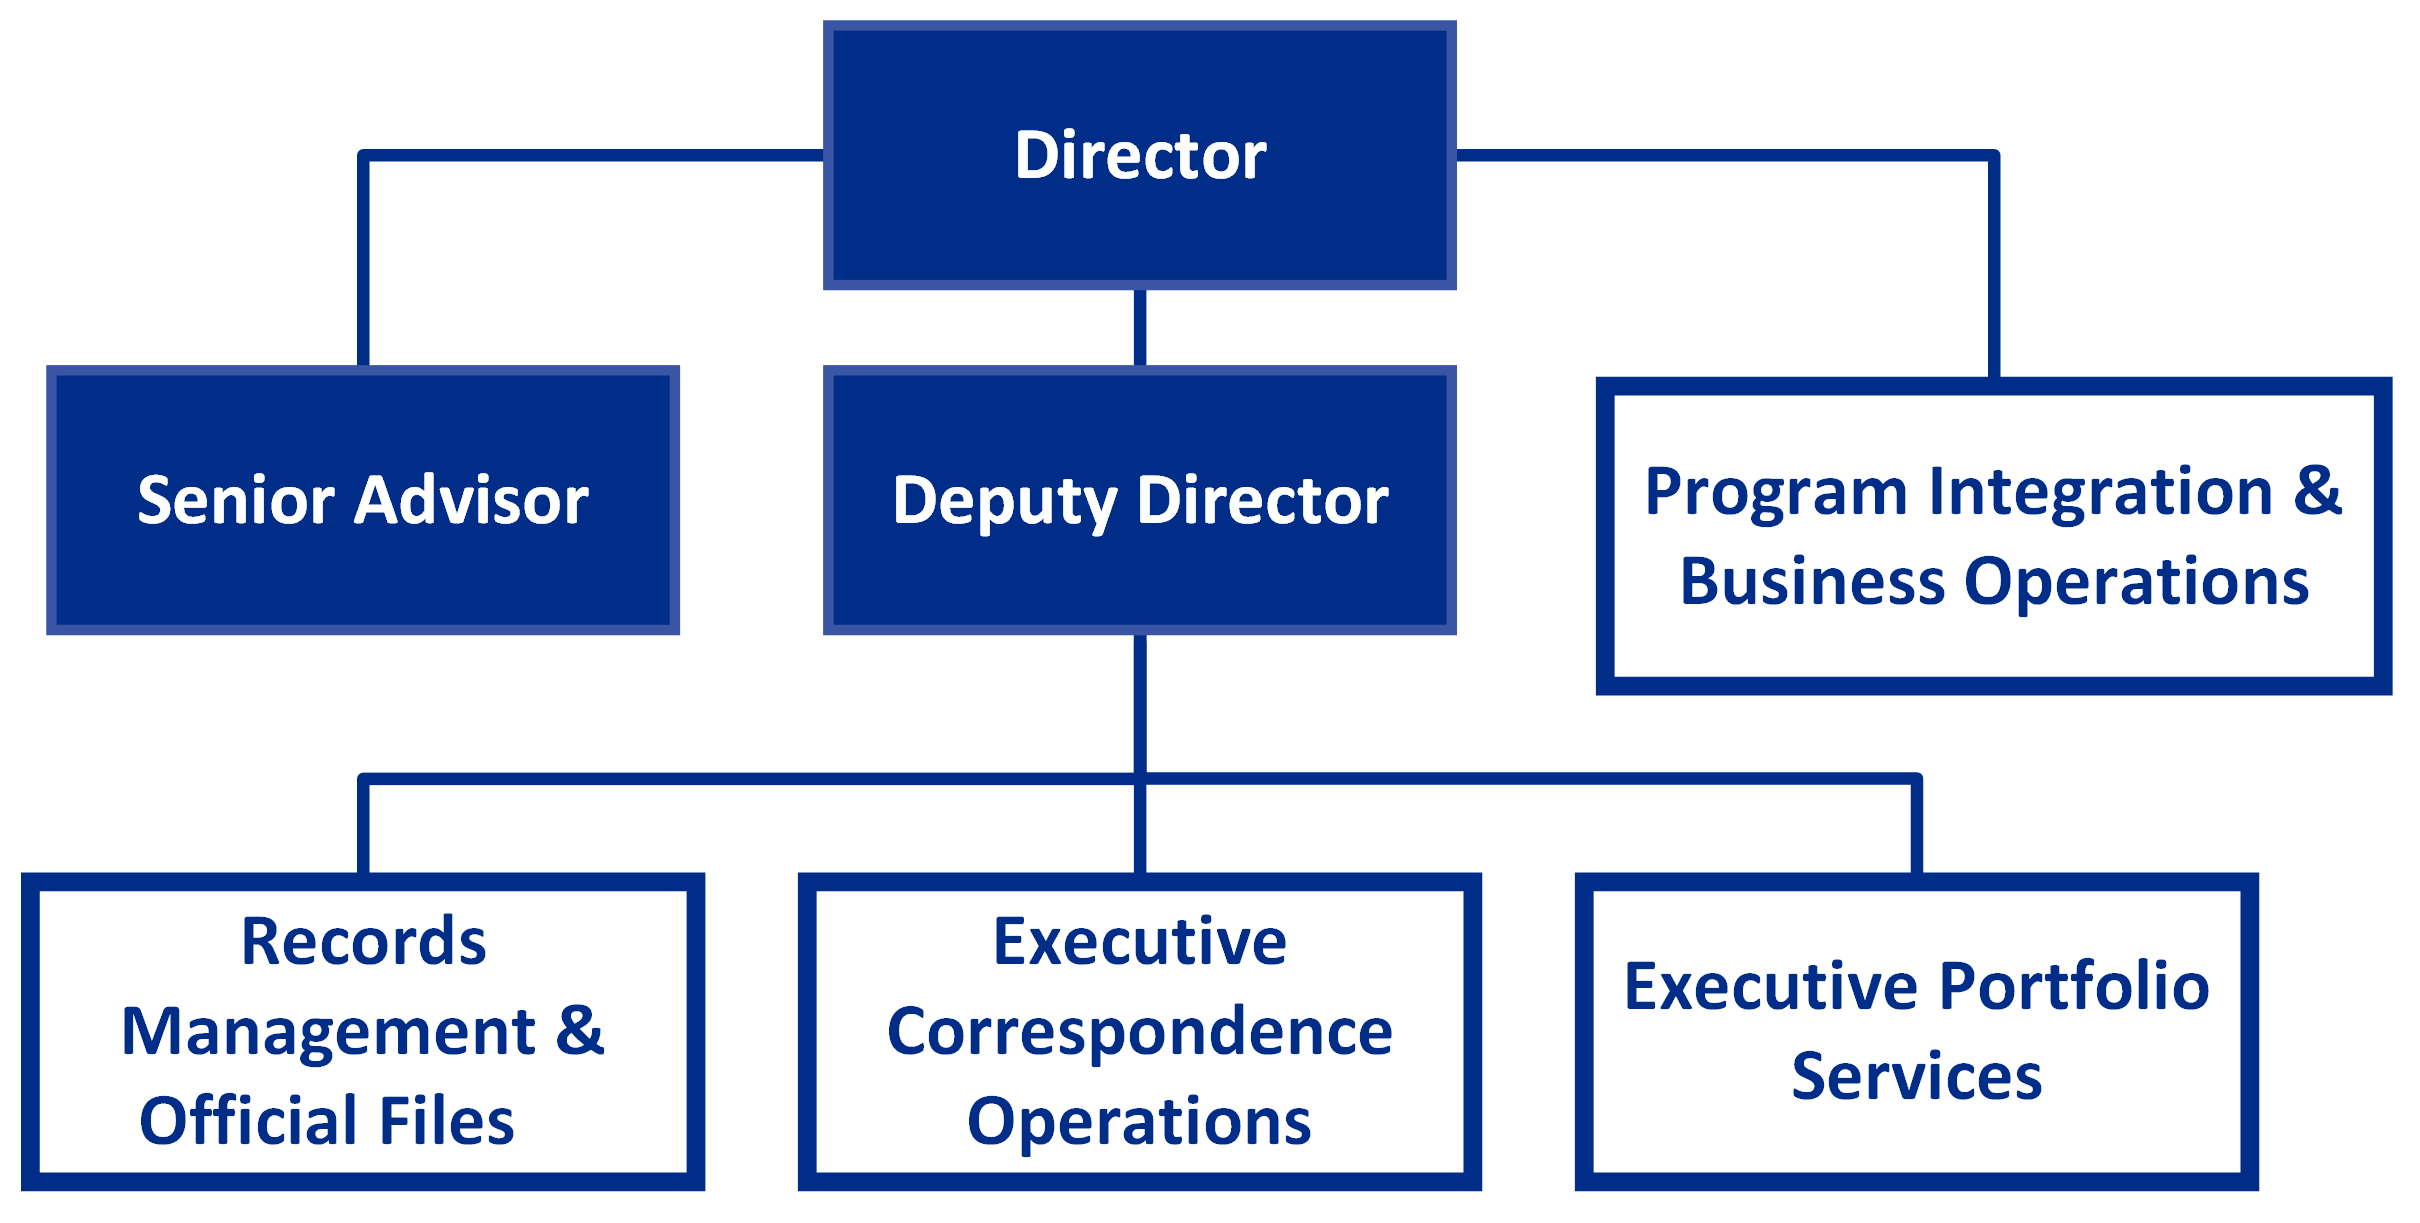 Reporting to the NIH Exec Sec Director are (1) a Senior Advisor, (2) the Deputy Director, and (3) Chief of the Program Integration and Business Operations Team. Managers of three divisions report to the Deputy Director: (1) Records Management and Official Files, (2) Executive Correspondence Operations, and (3) Executive Portfolio Services